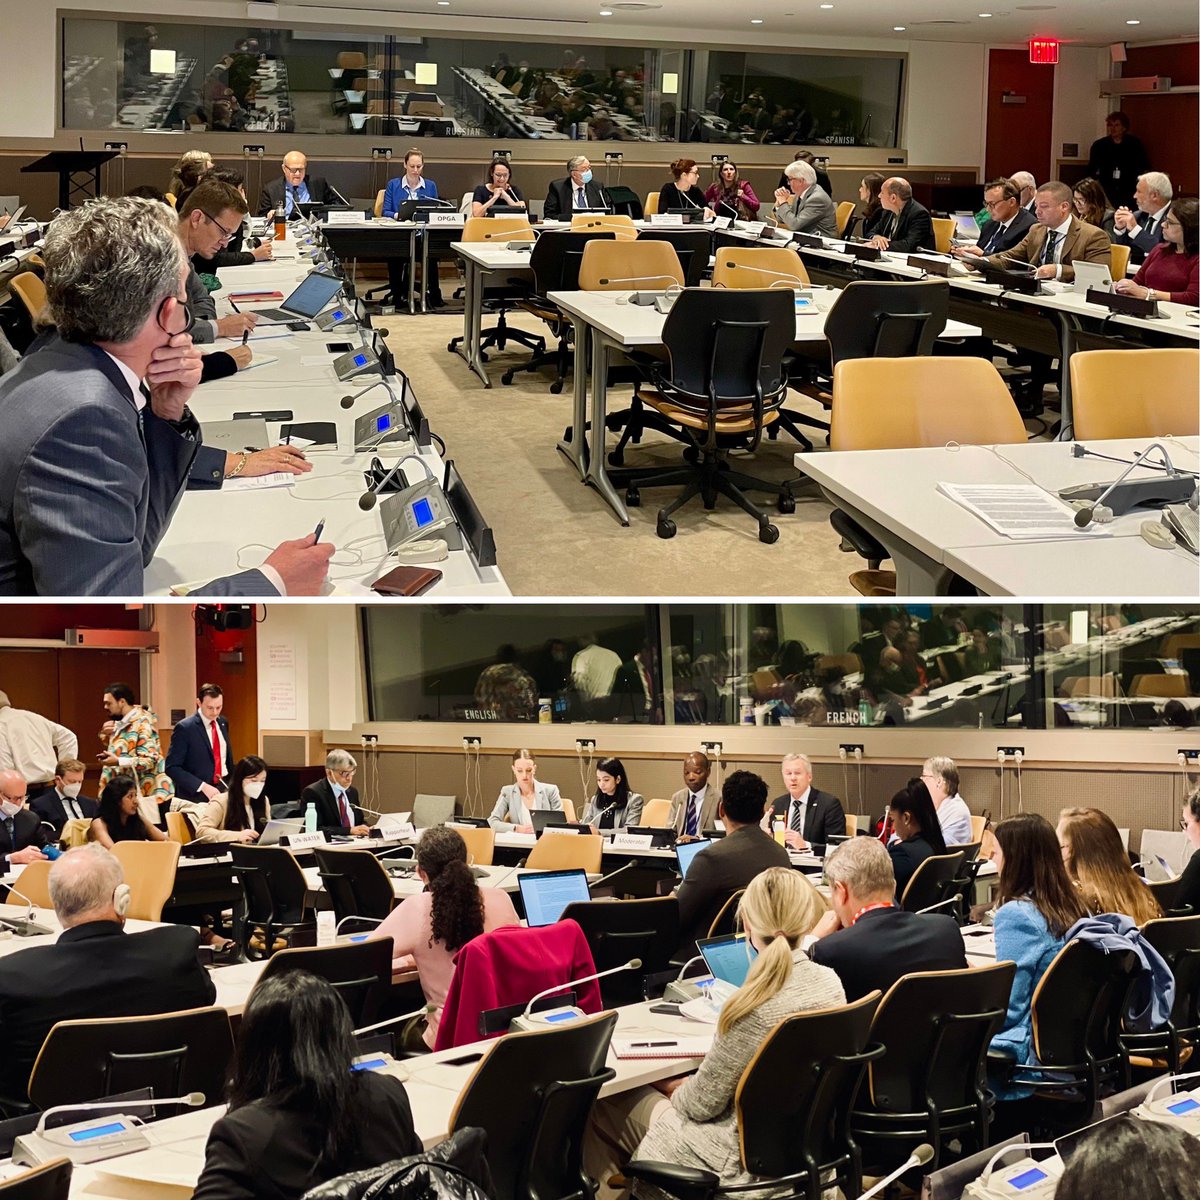 Happening now! Stakeholder consultations for the Preparatory Meeting of the #UN2023WaterConference. Follow along #WaterAction ⬇️ 🎥 Roundtable 1️⃣ on Governance: bit.ly/3DsSMyH 🎥 Roundtable 2️⃣ on Capacity Development: bit.ly/3TwGScB